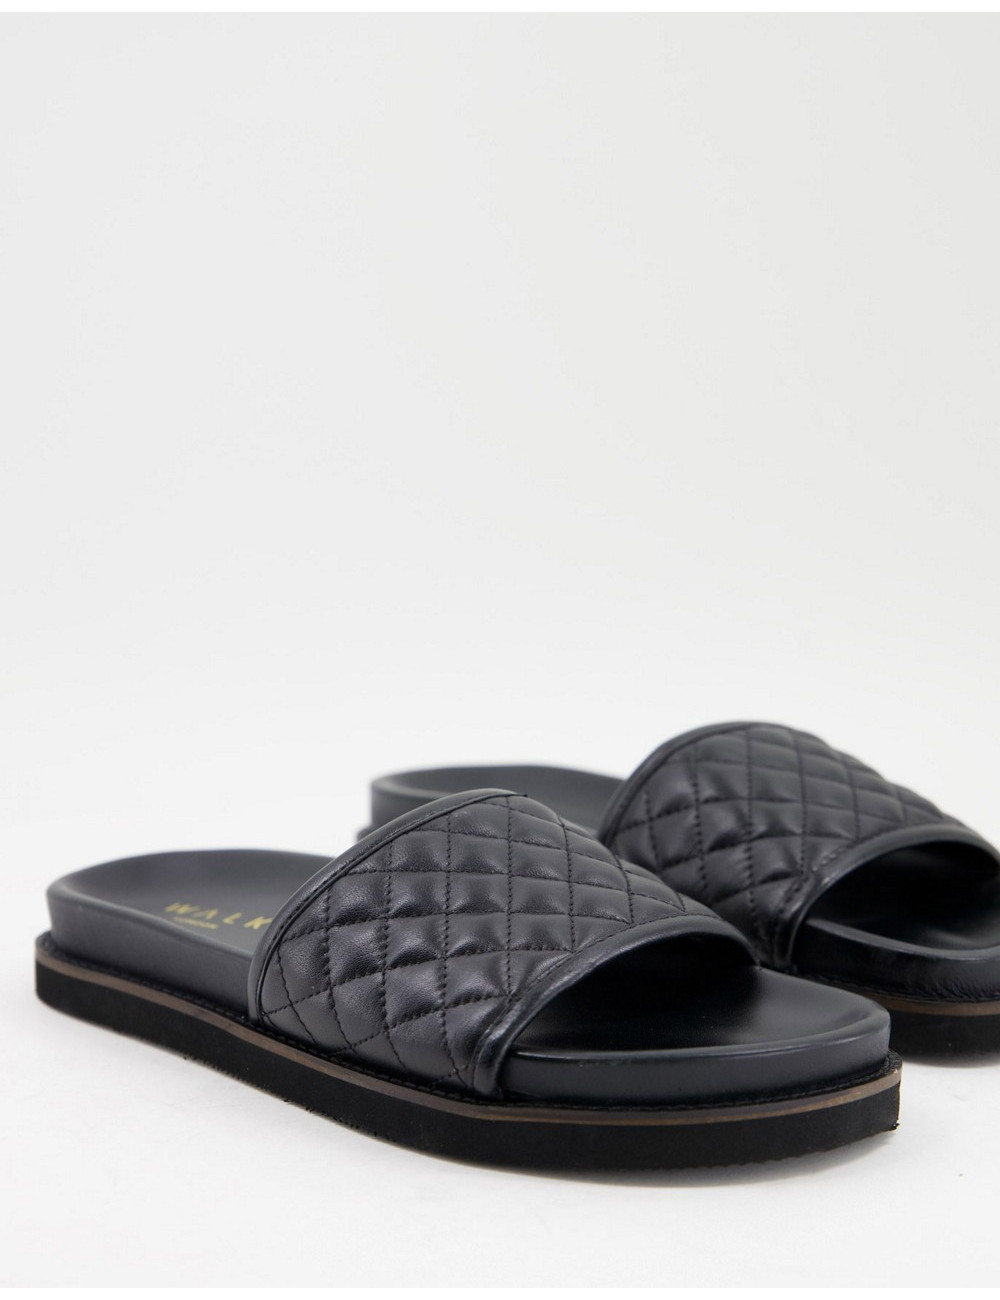 Walk London Ronny quilted...